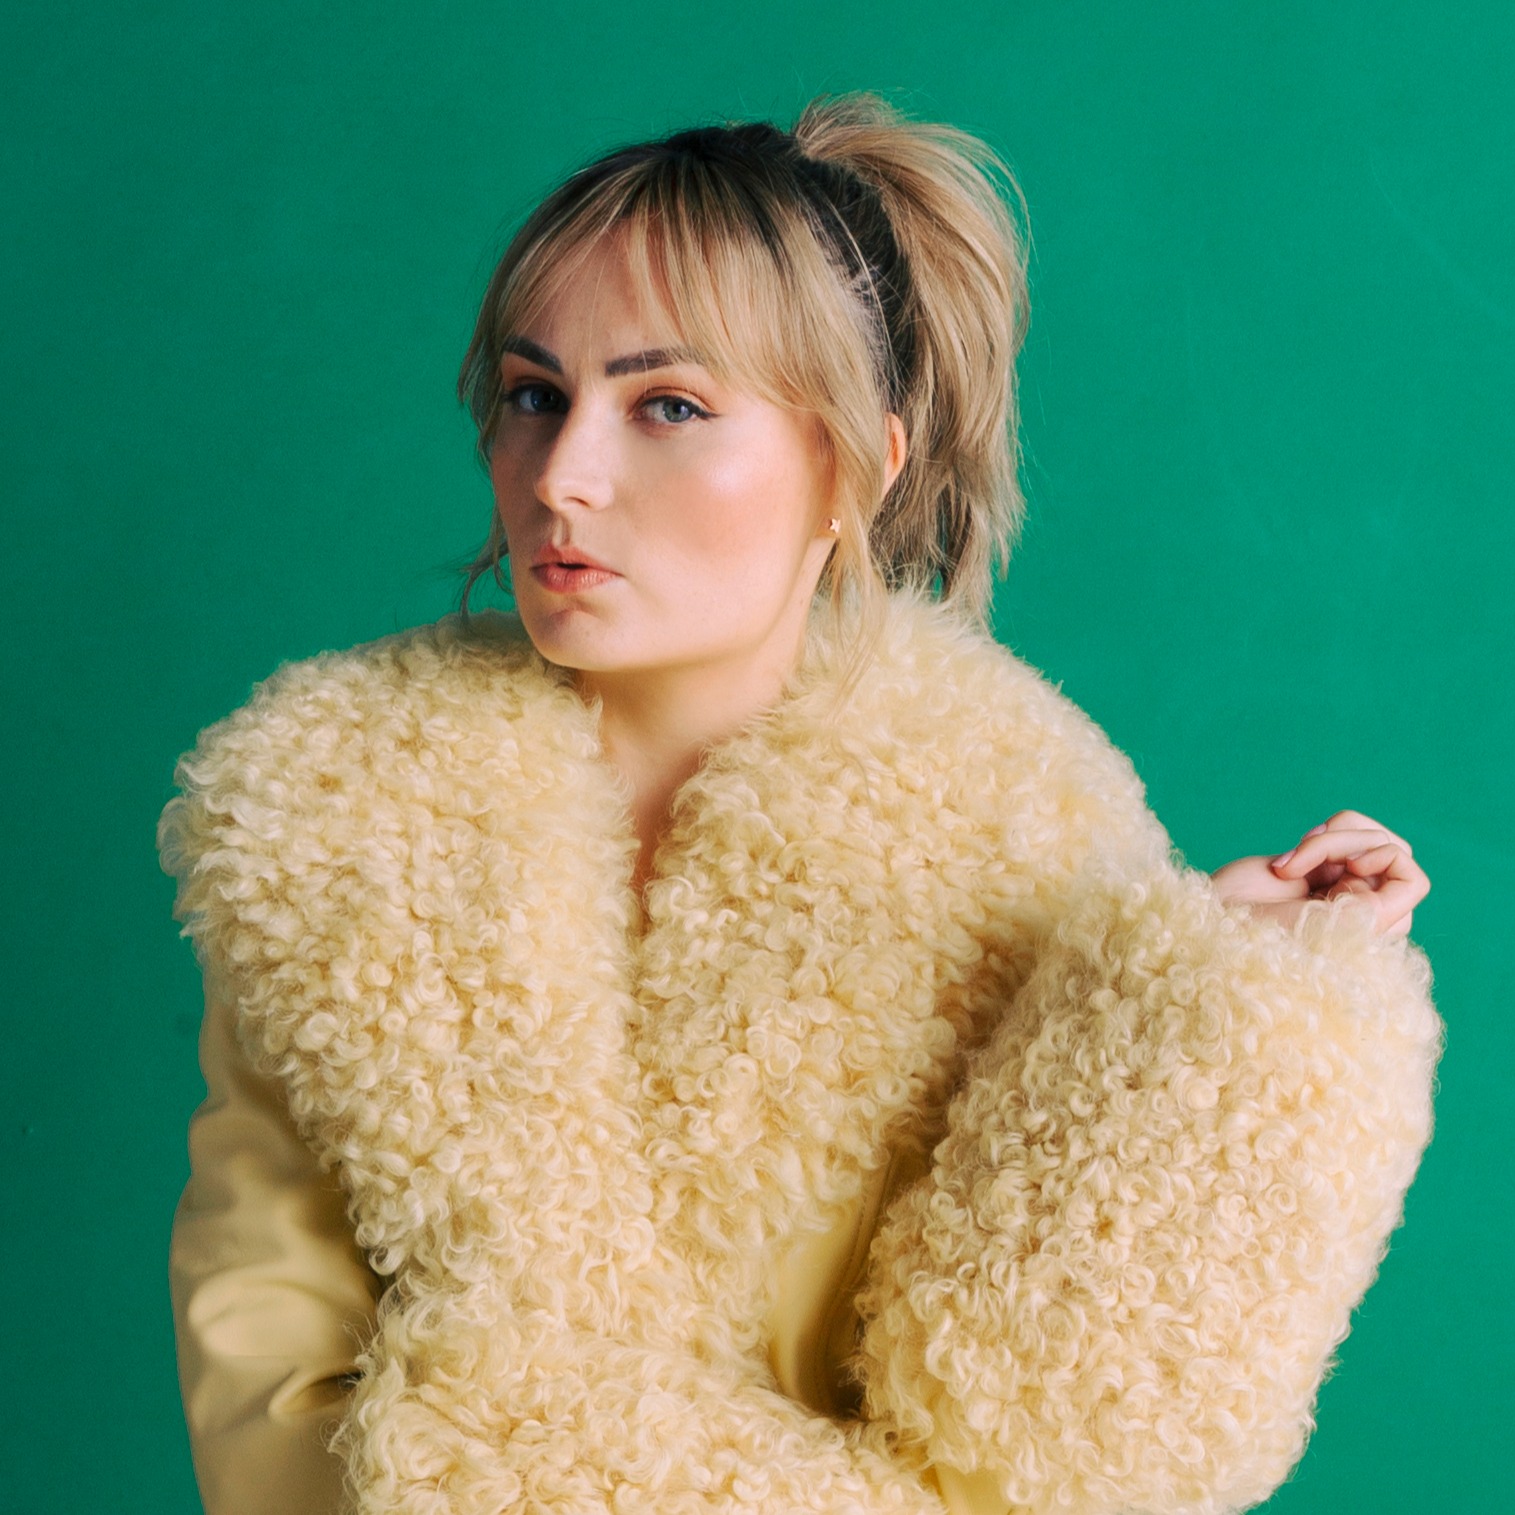 Headshot of Molly Burke, a white woman with blonde hair in a pony tail wearing a fur coat.